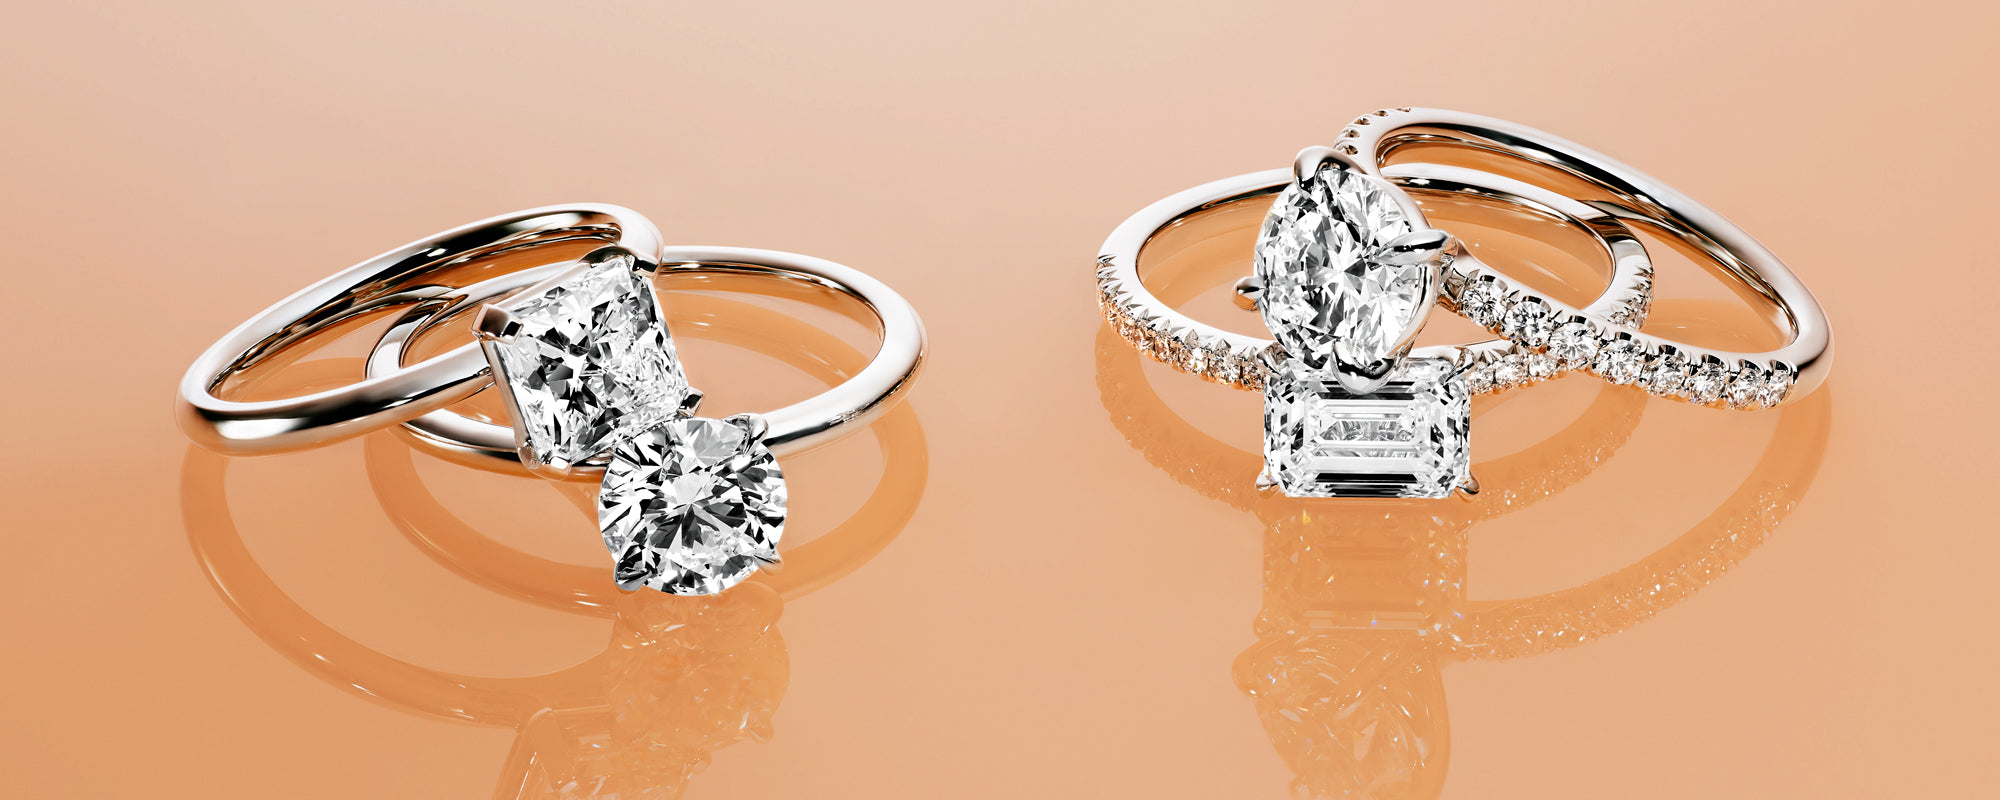 How To Pick An Engagement Ring Without Her Knowing (Our Step-by-Step Guide)